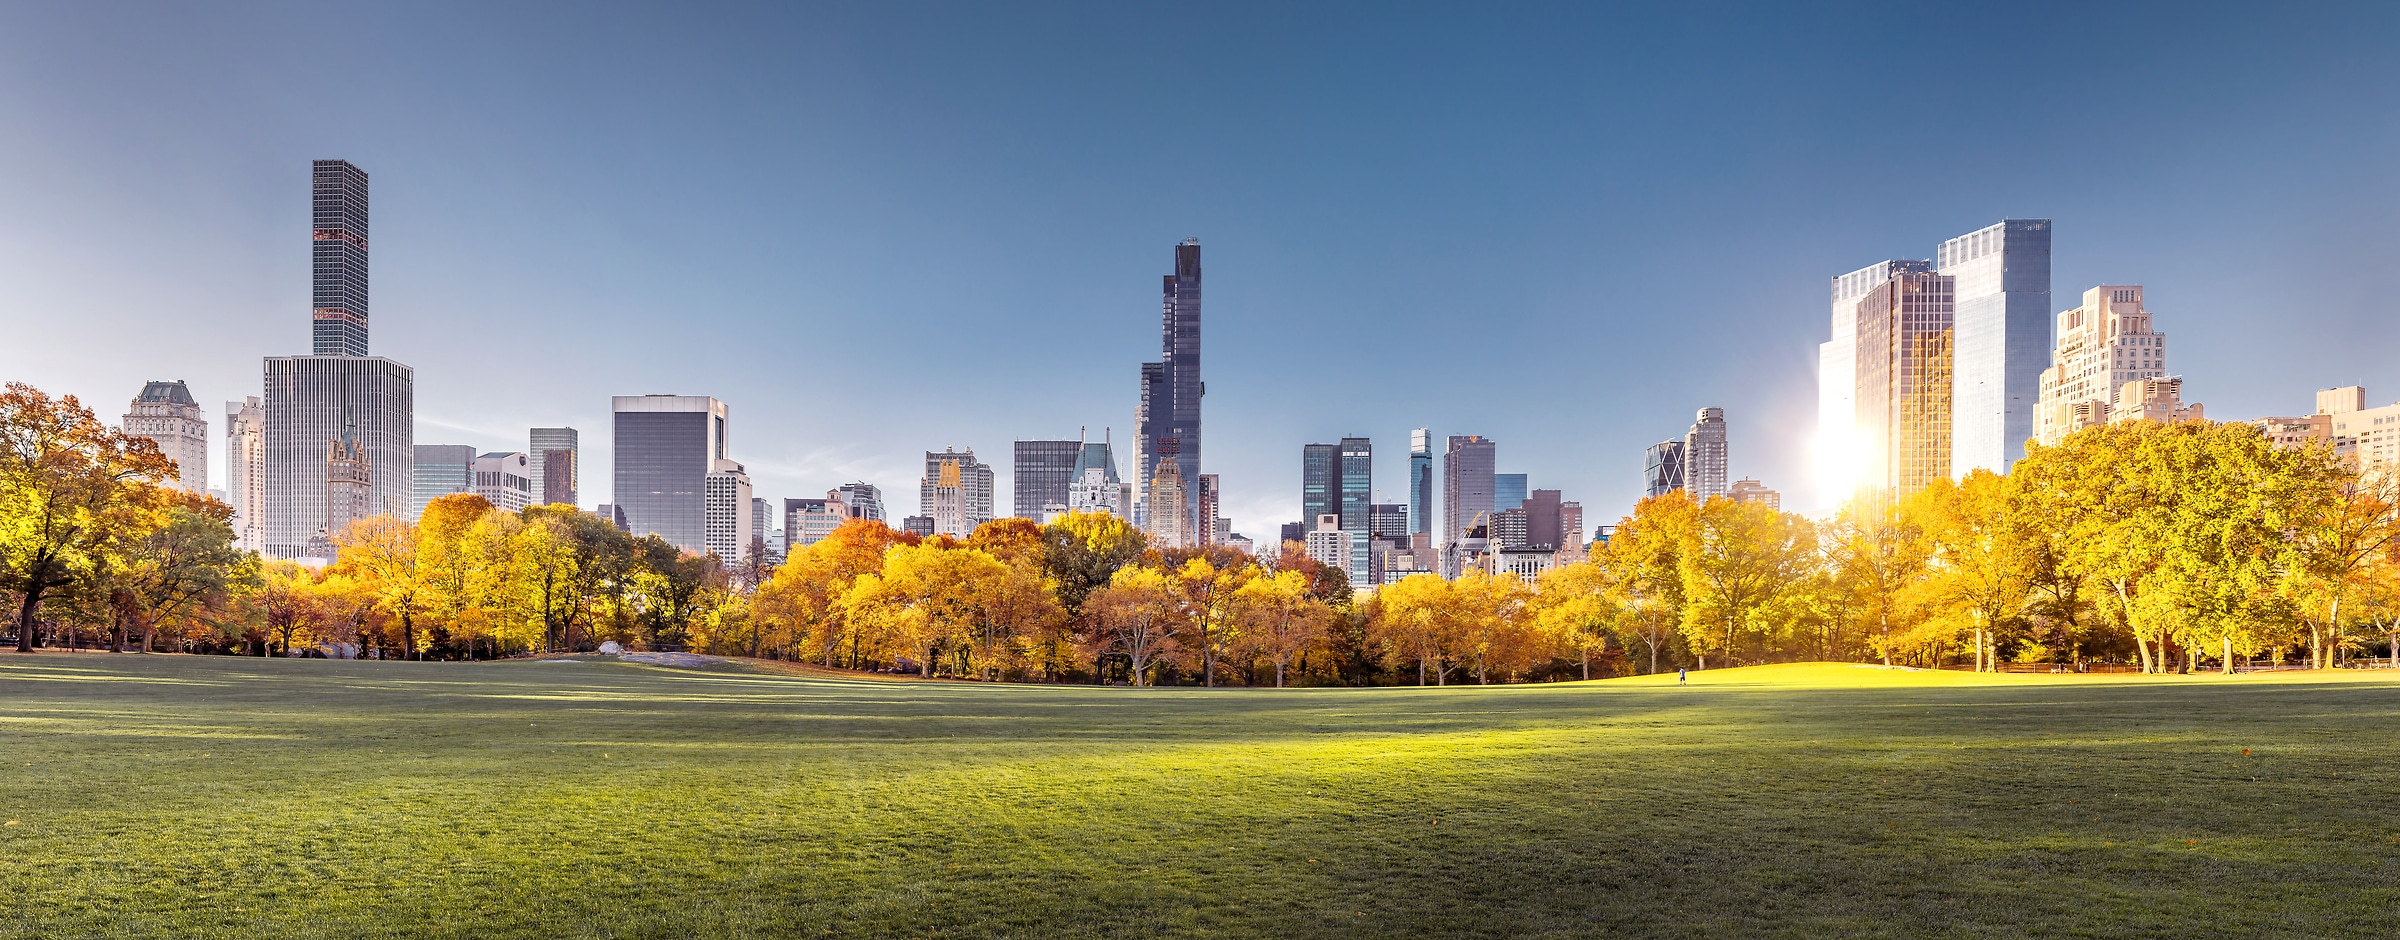 160 megapixels! A very high resolution landscape VAST photo of Sheep Meadow and the Manhattan skyline in Central Park at sunrise during autumn; created in New York City by Dan Piech.